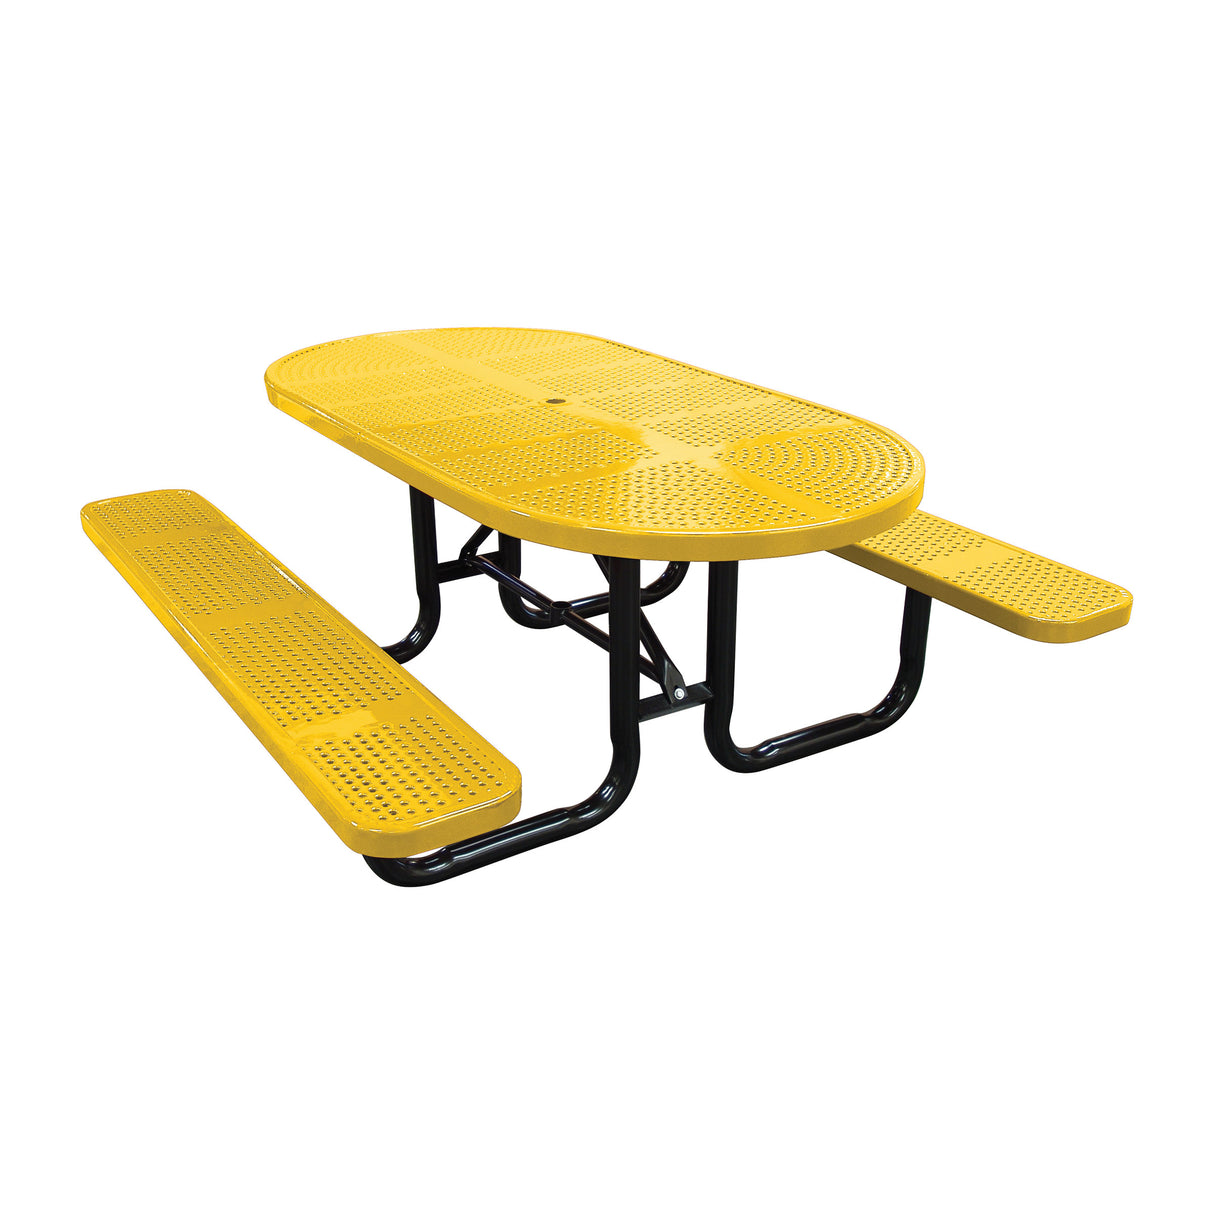 Oval Perforated Metal Picnic Table